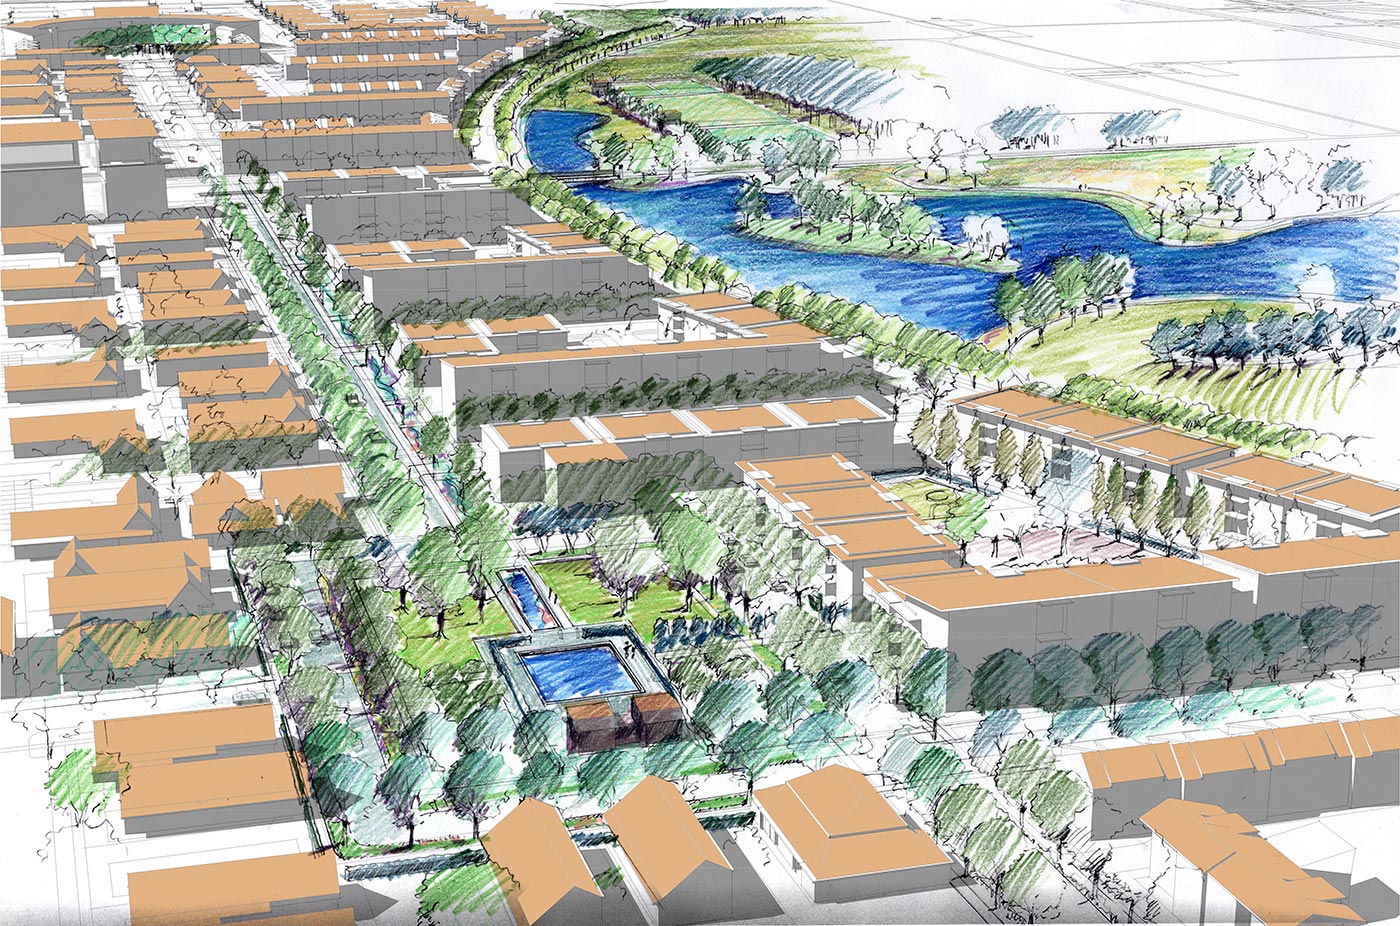 University of Illinois at Champaign-Urbana Sketch for New Community showing Garden, Pond and Pedestrian-Friendly Streetscape Designed by Charlottesville, Virginia Architect HEDS.